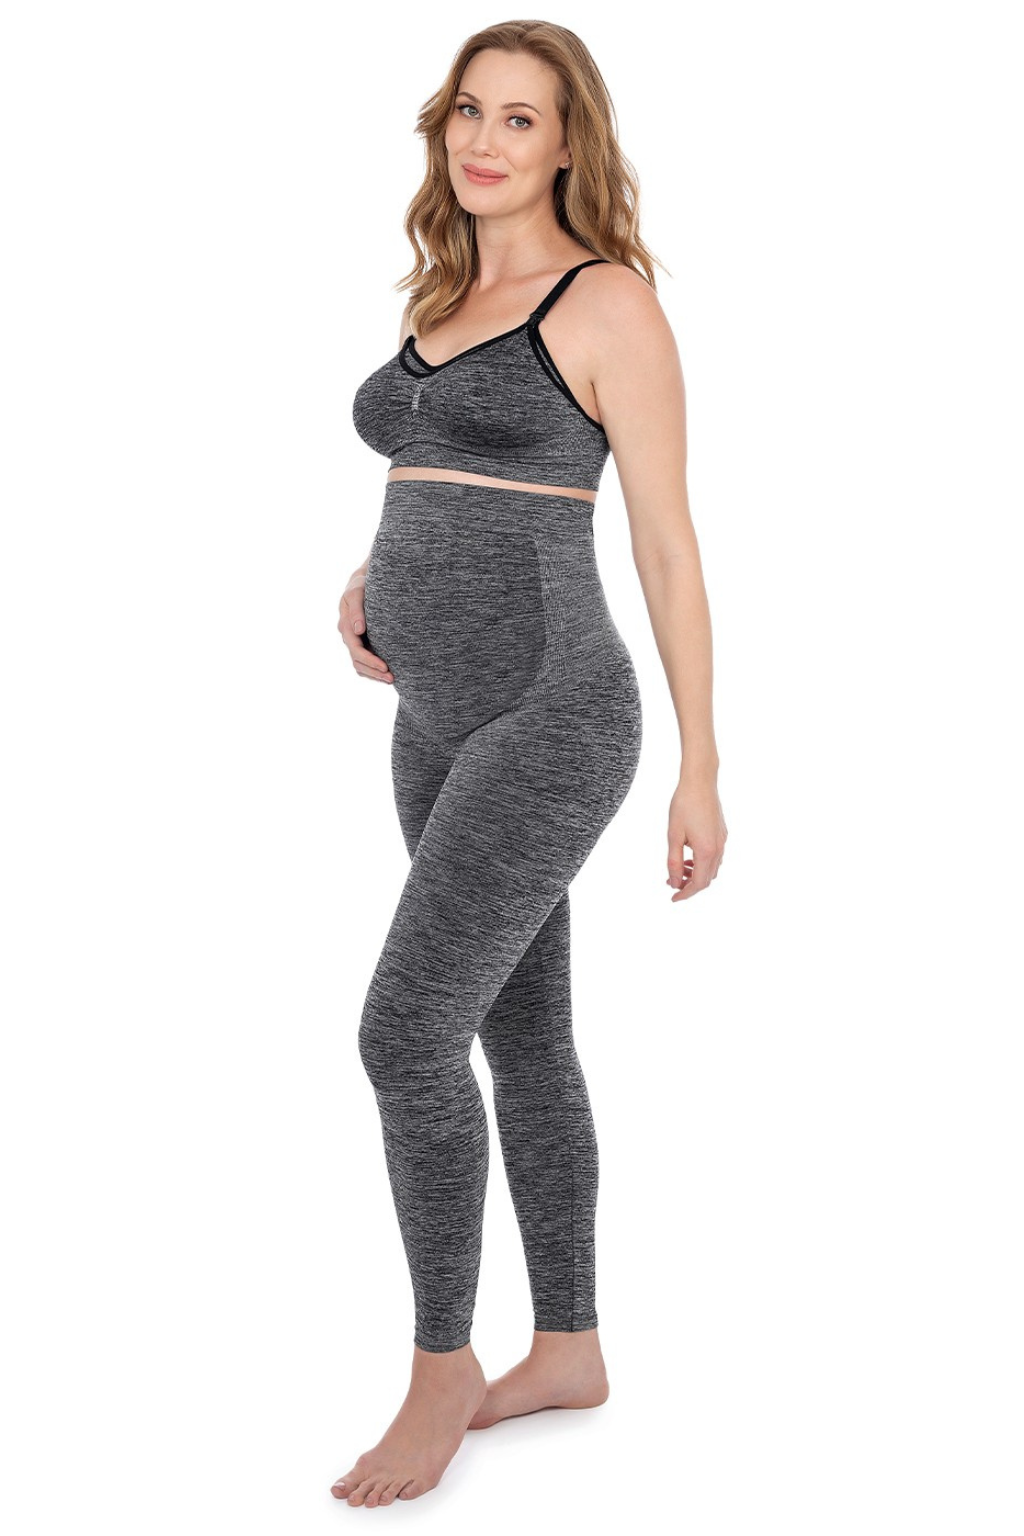 Buttergene Women's Maternity Leggings Over The Belly Maternity Yoga Pants  Workout Pregnancy Leggings at Amazon Women's Clothing store